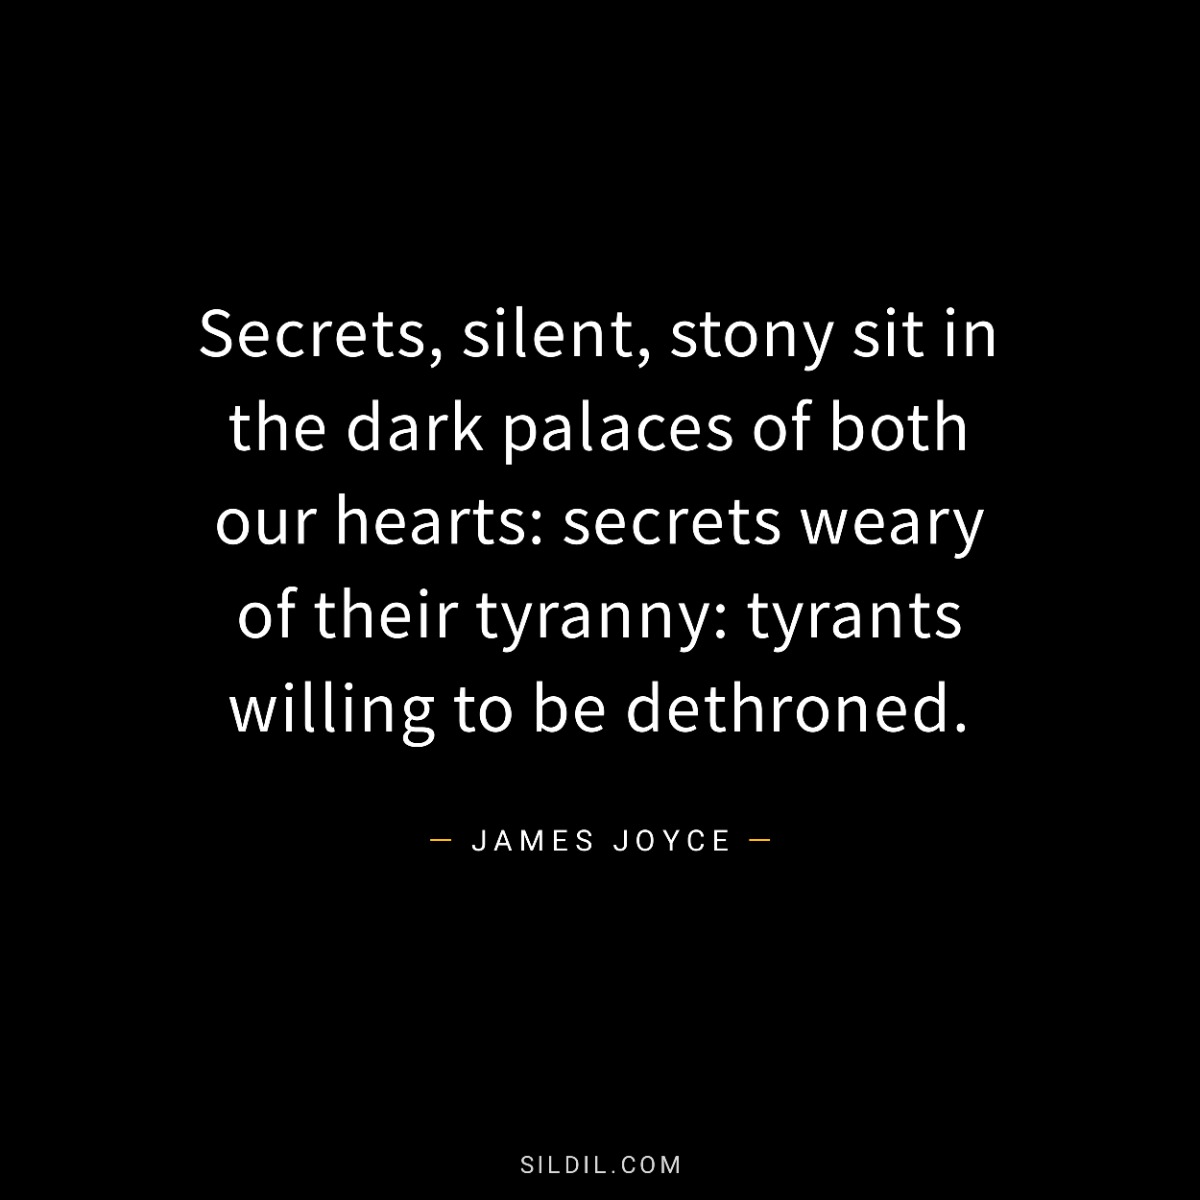 Secrets, silent, stony sit in the dark palaces of both our hearts: secrets weary of their tyranny: tyrants willing to be dethroned.